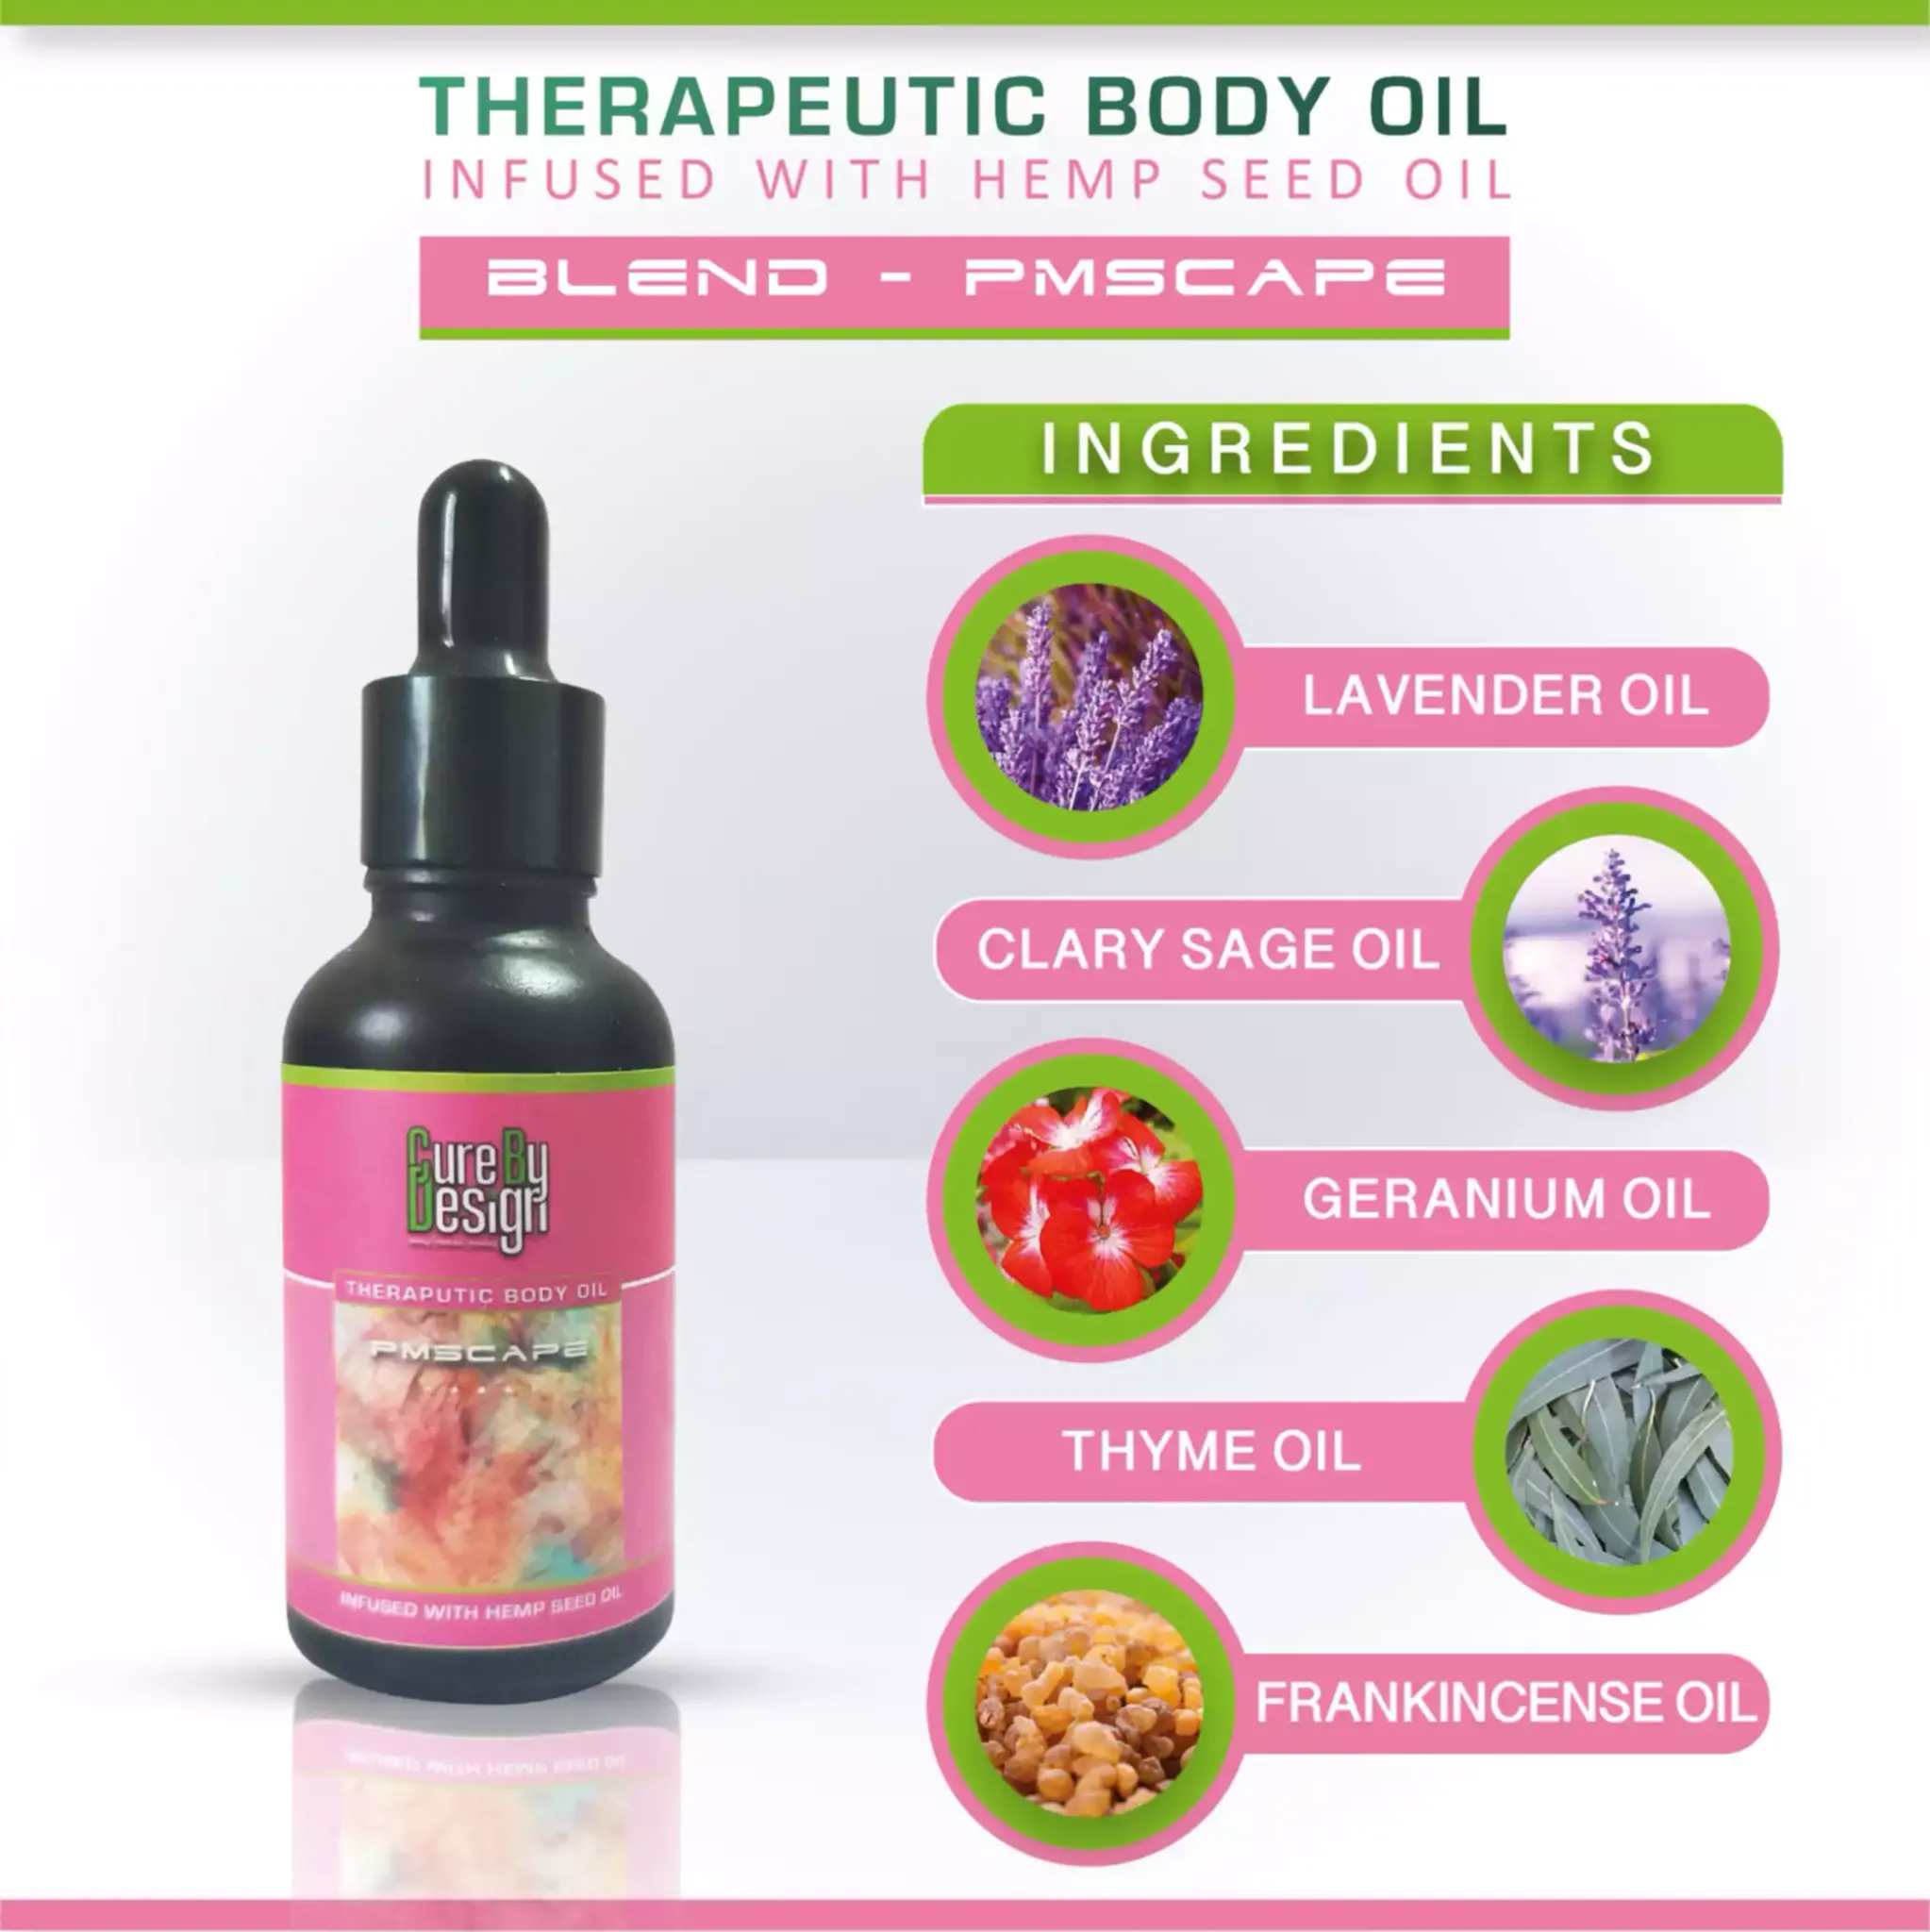 Cure By Design Therapeutic Healing Blend - PMScape 30ml